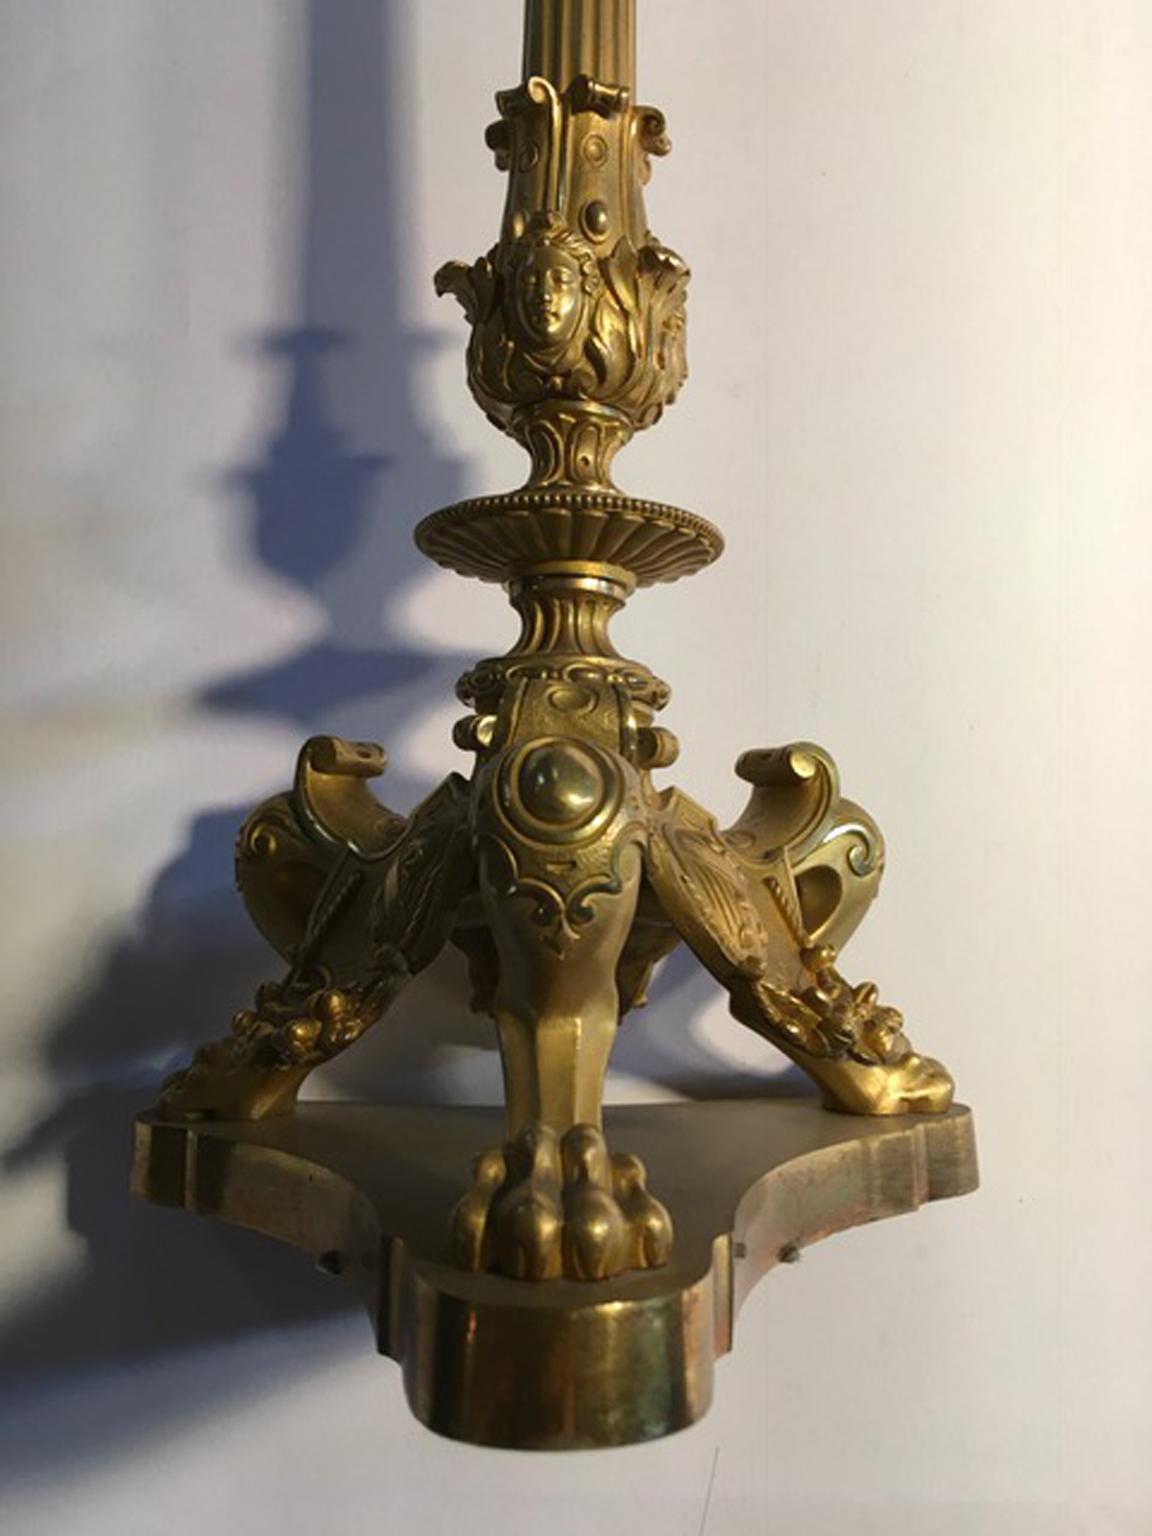 Italy Mid-18th Century  pair of brass Empire five lights candleholders or table lamps

This wonderful pair of brass candle holders, is a magnificent hand made work by Italian artisan of mid 18th Century. The emblem in the feet indicates the nobility